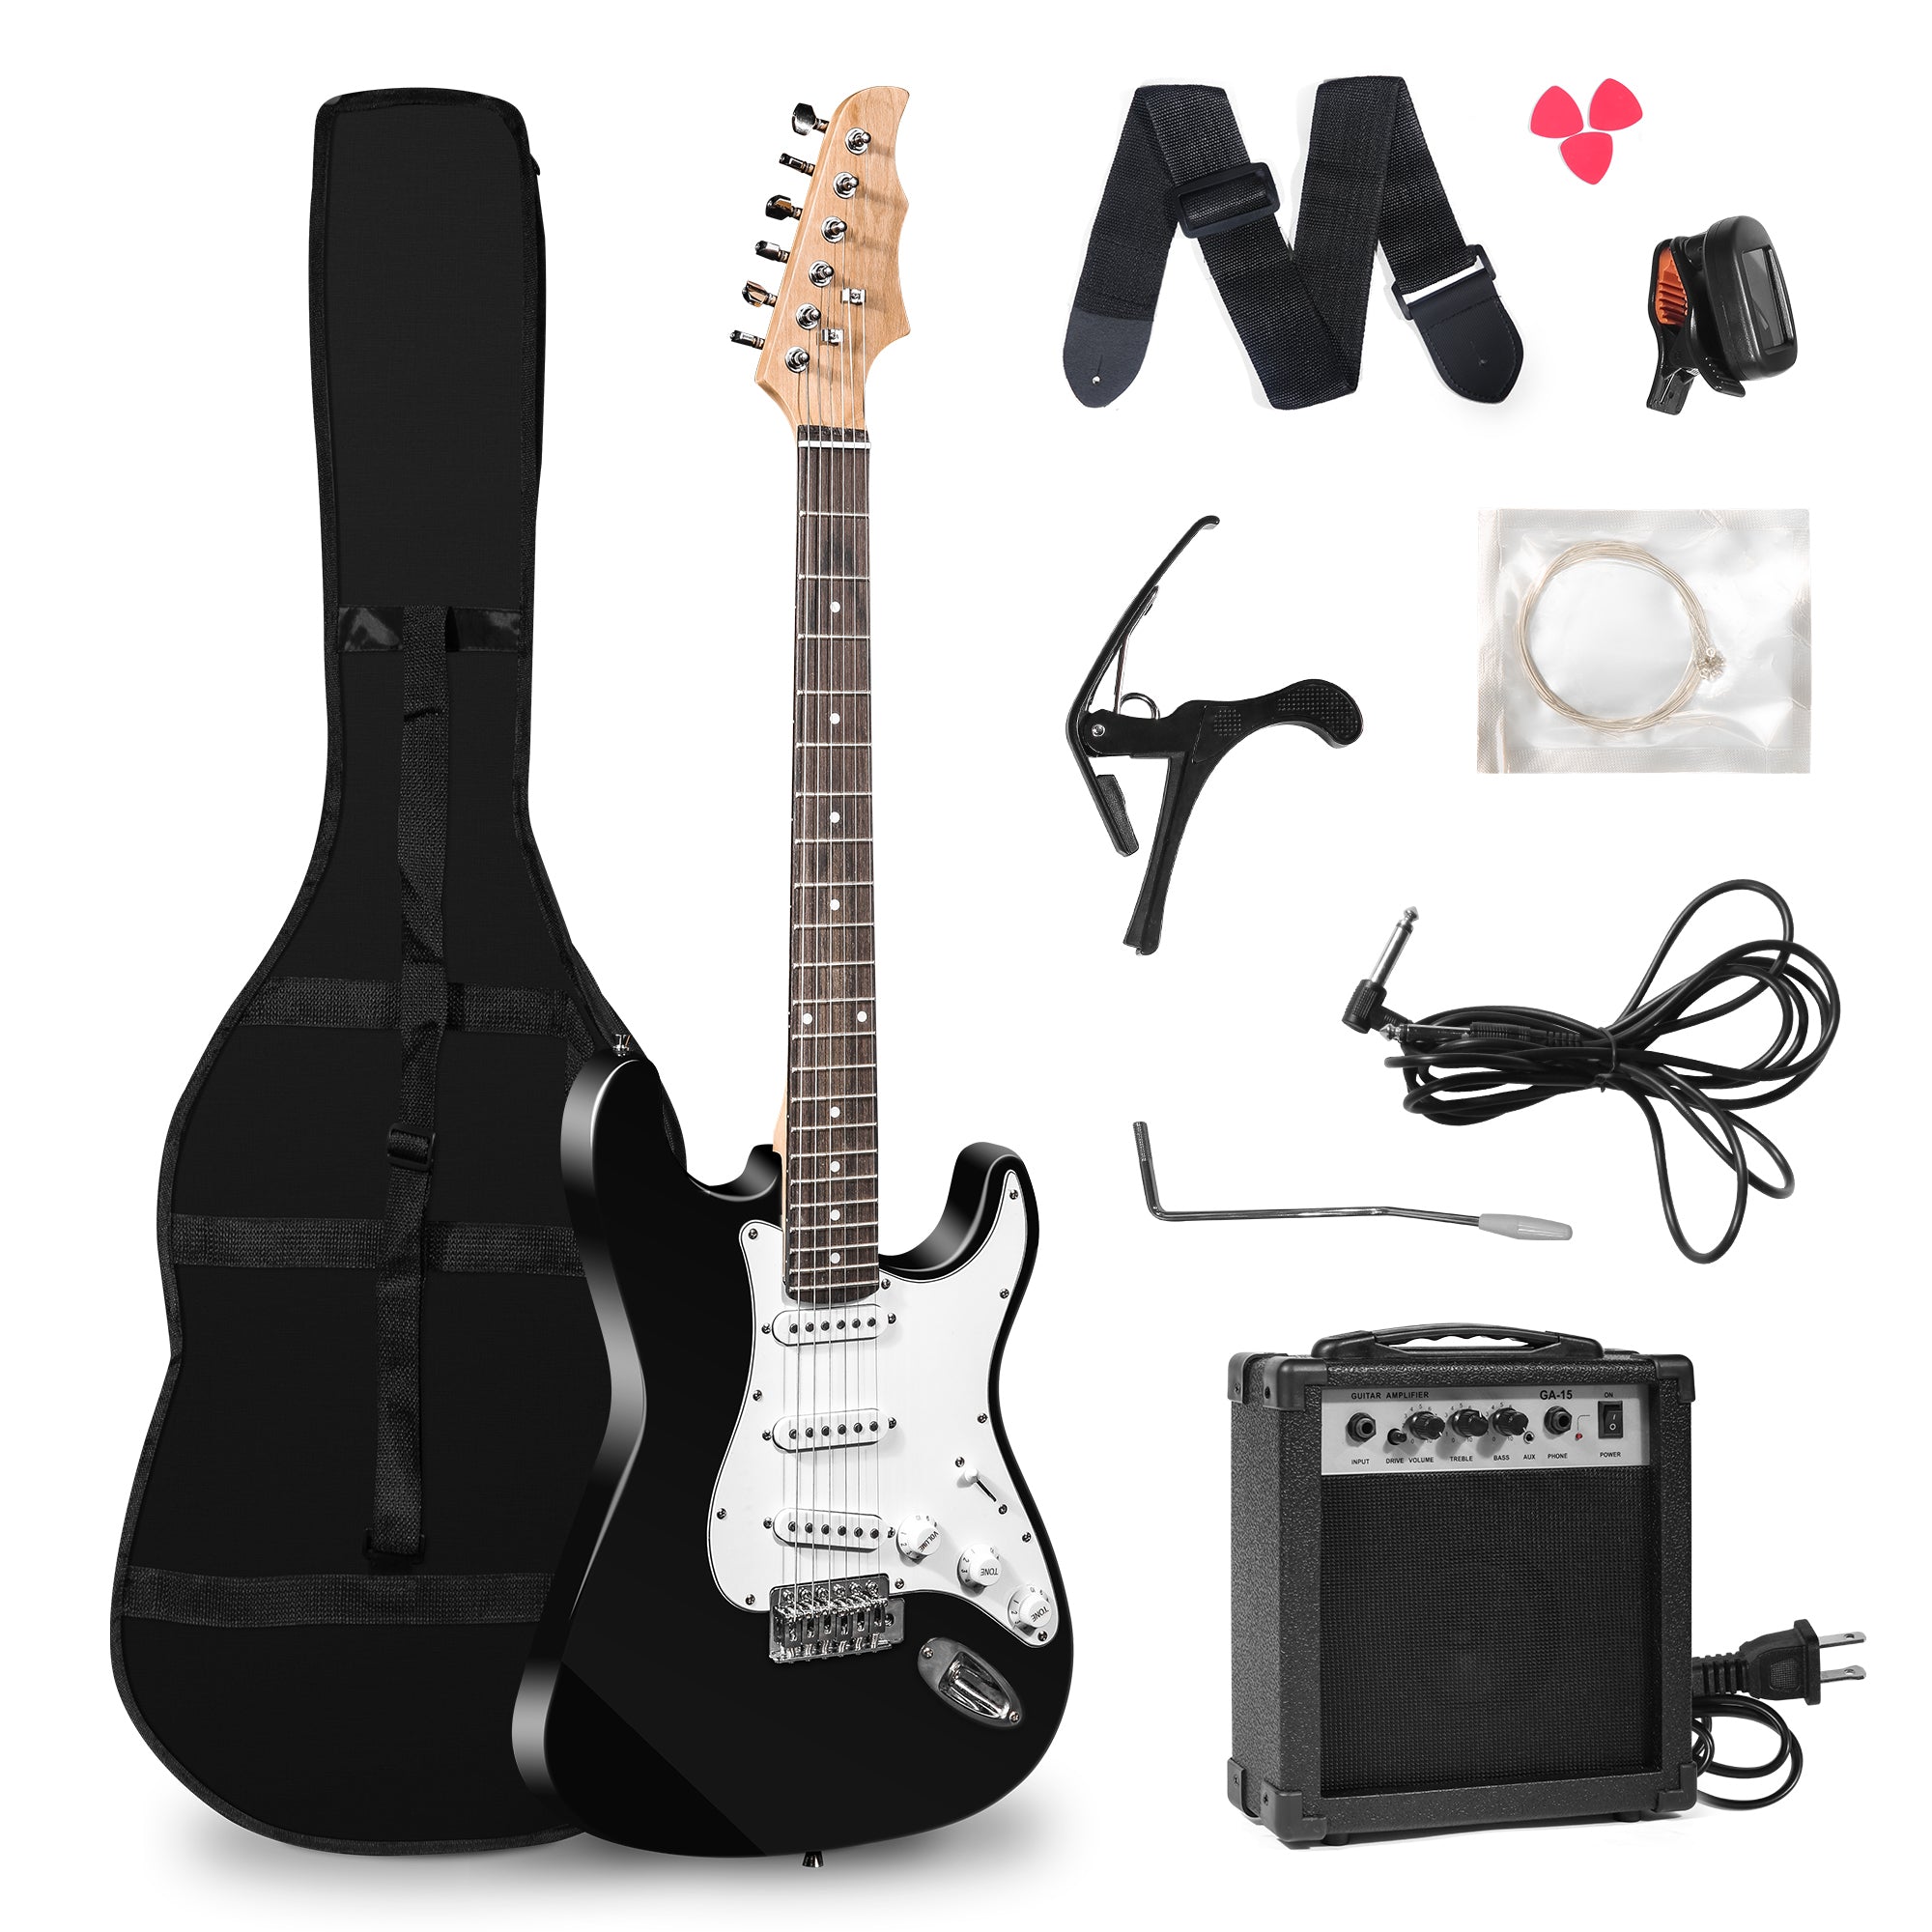 39.5" Full Size Electric Guitar for Beginners with Amplifier, Black and White